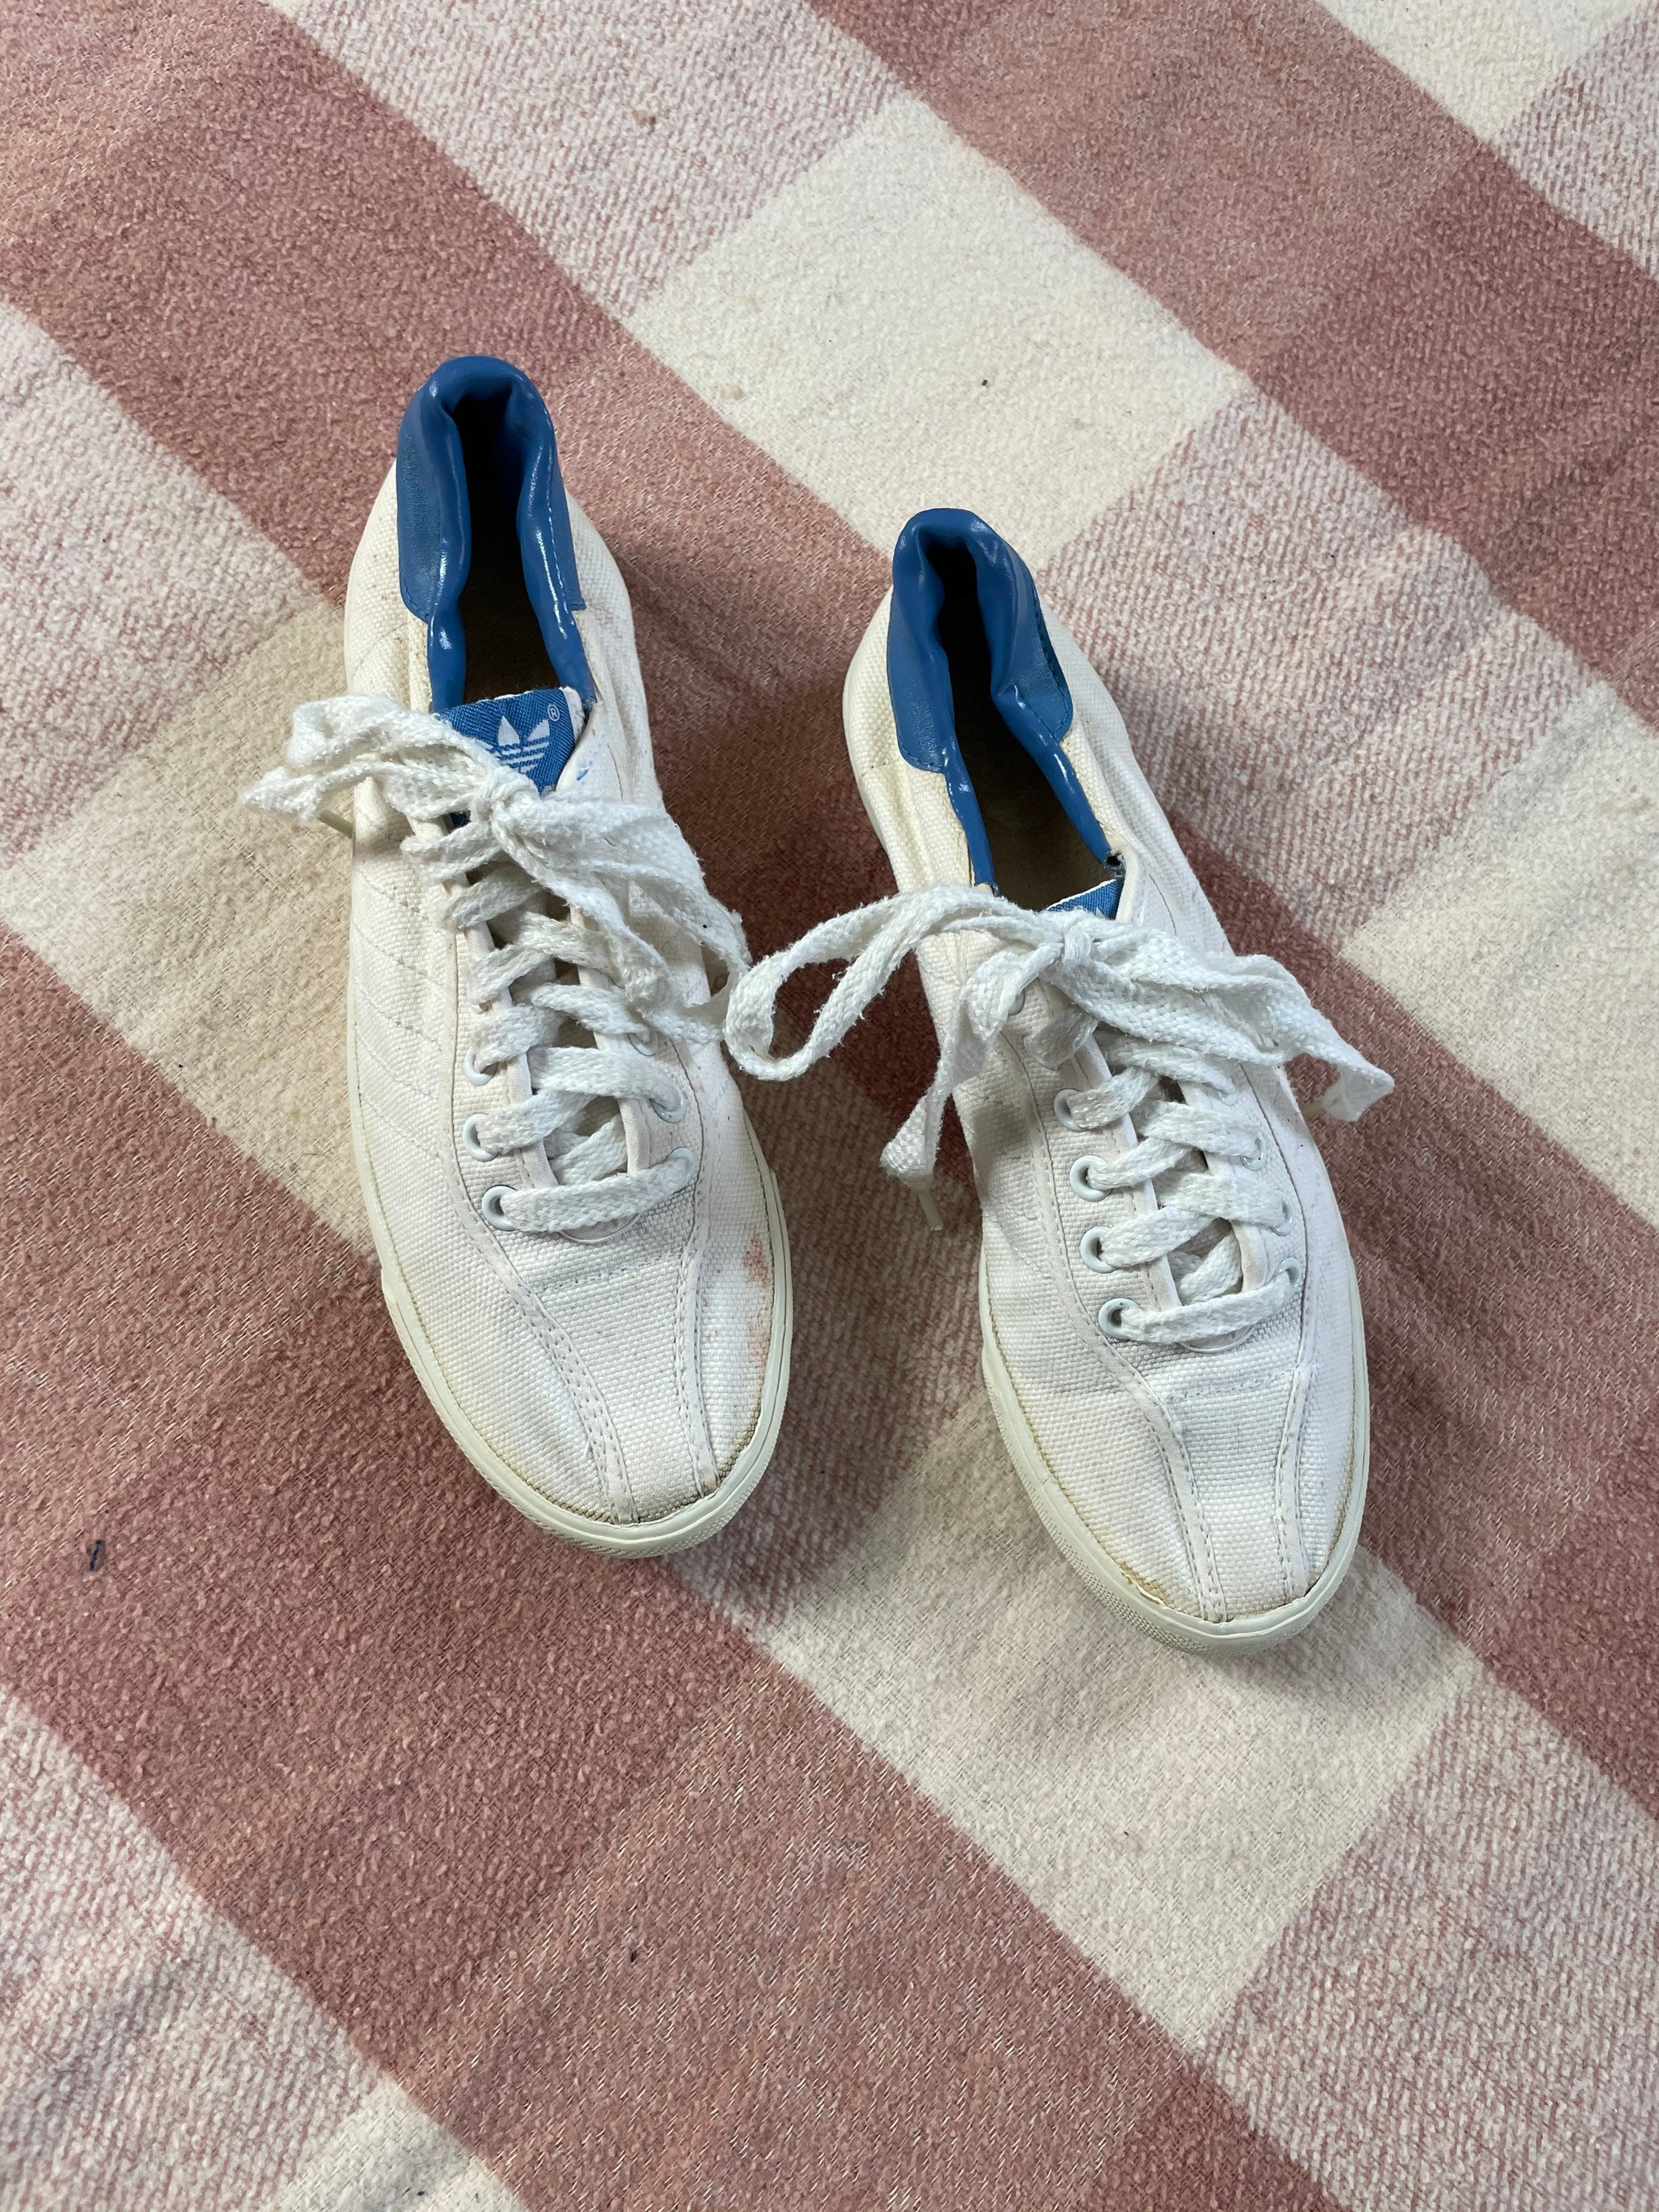 Vintage 1990s Adidas Sneakers White and blue Sz 7.5 | Etsy